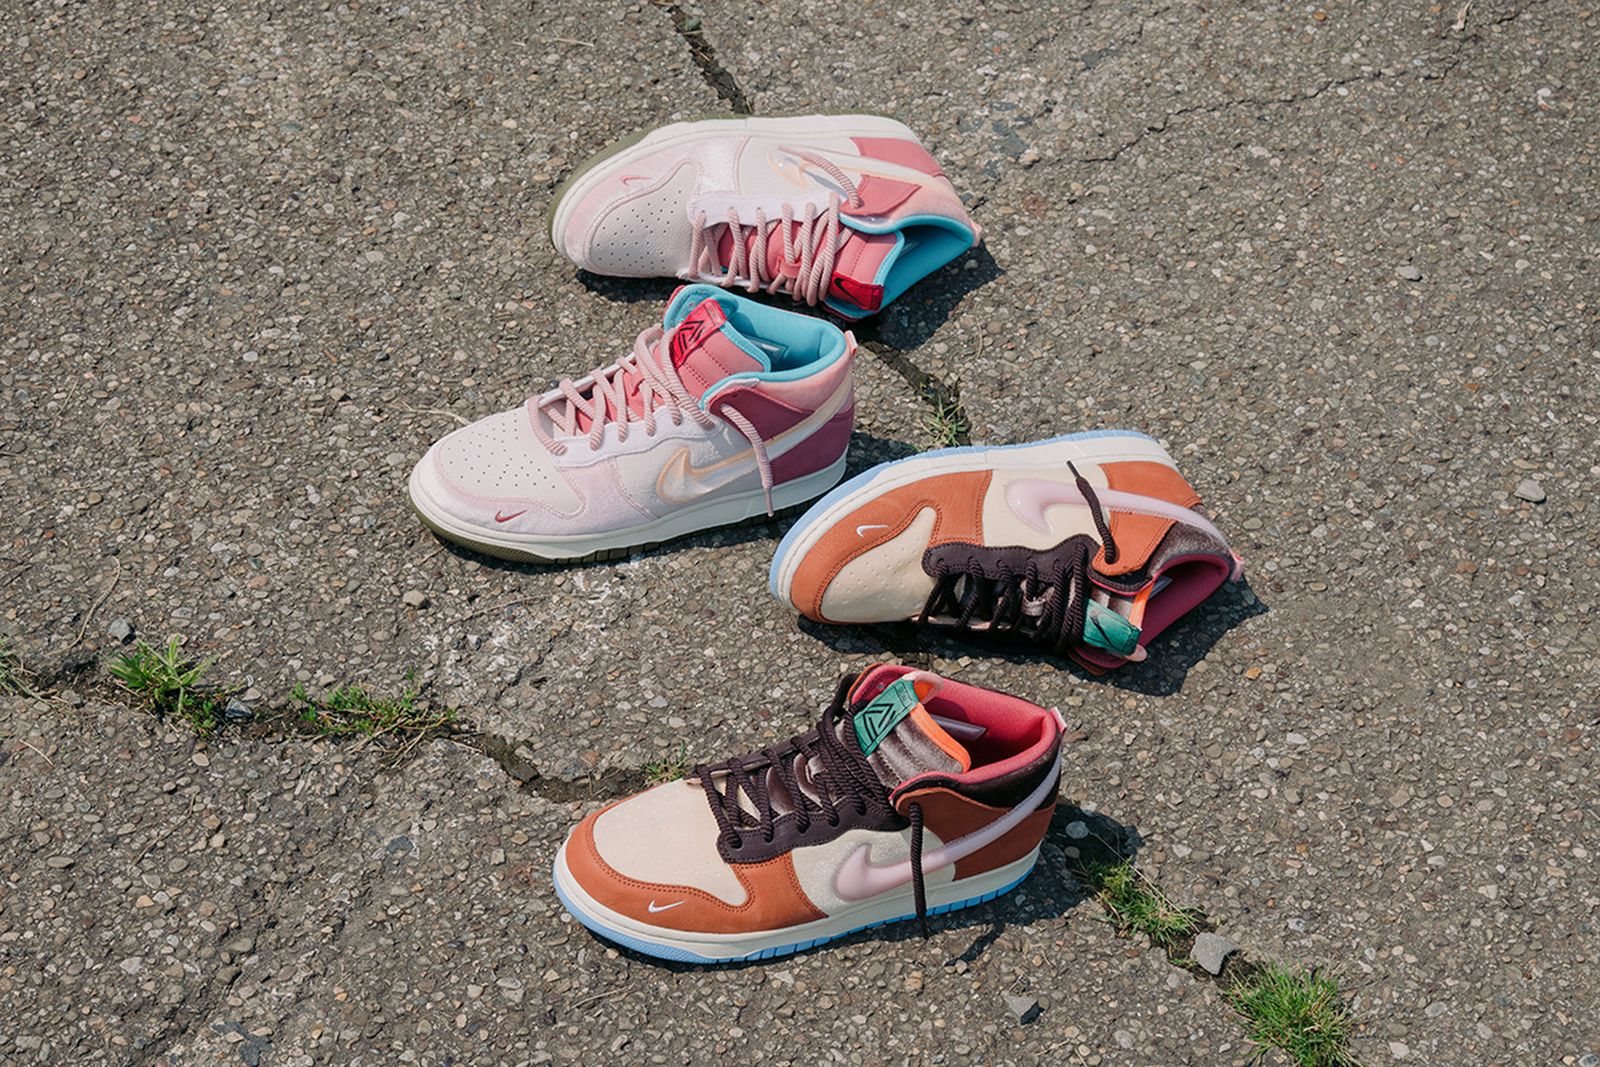 Social free lunch dunks Status x Nike Dunk “Free Lunch”: Where to Buy Next Week